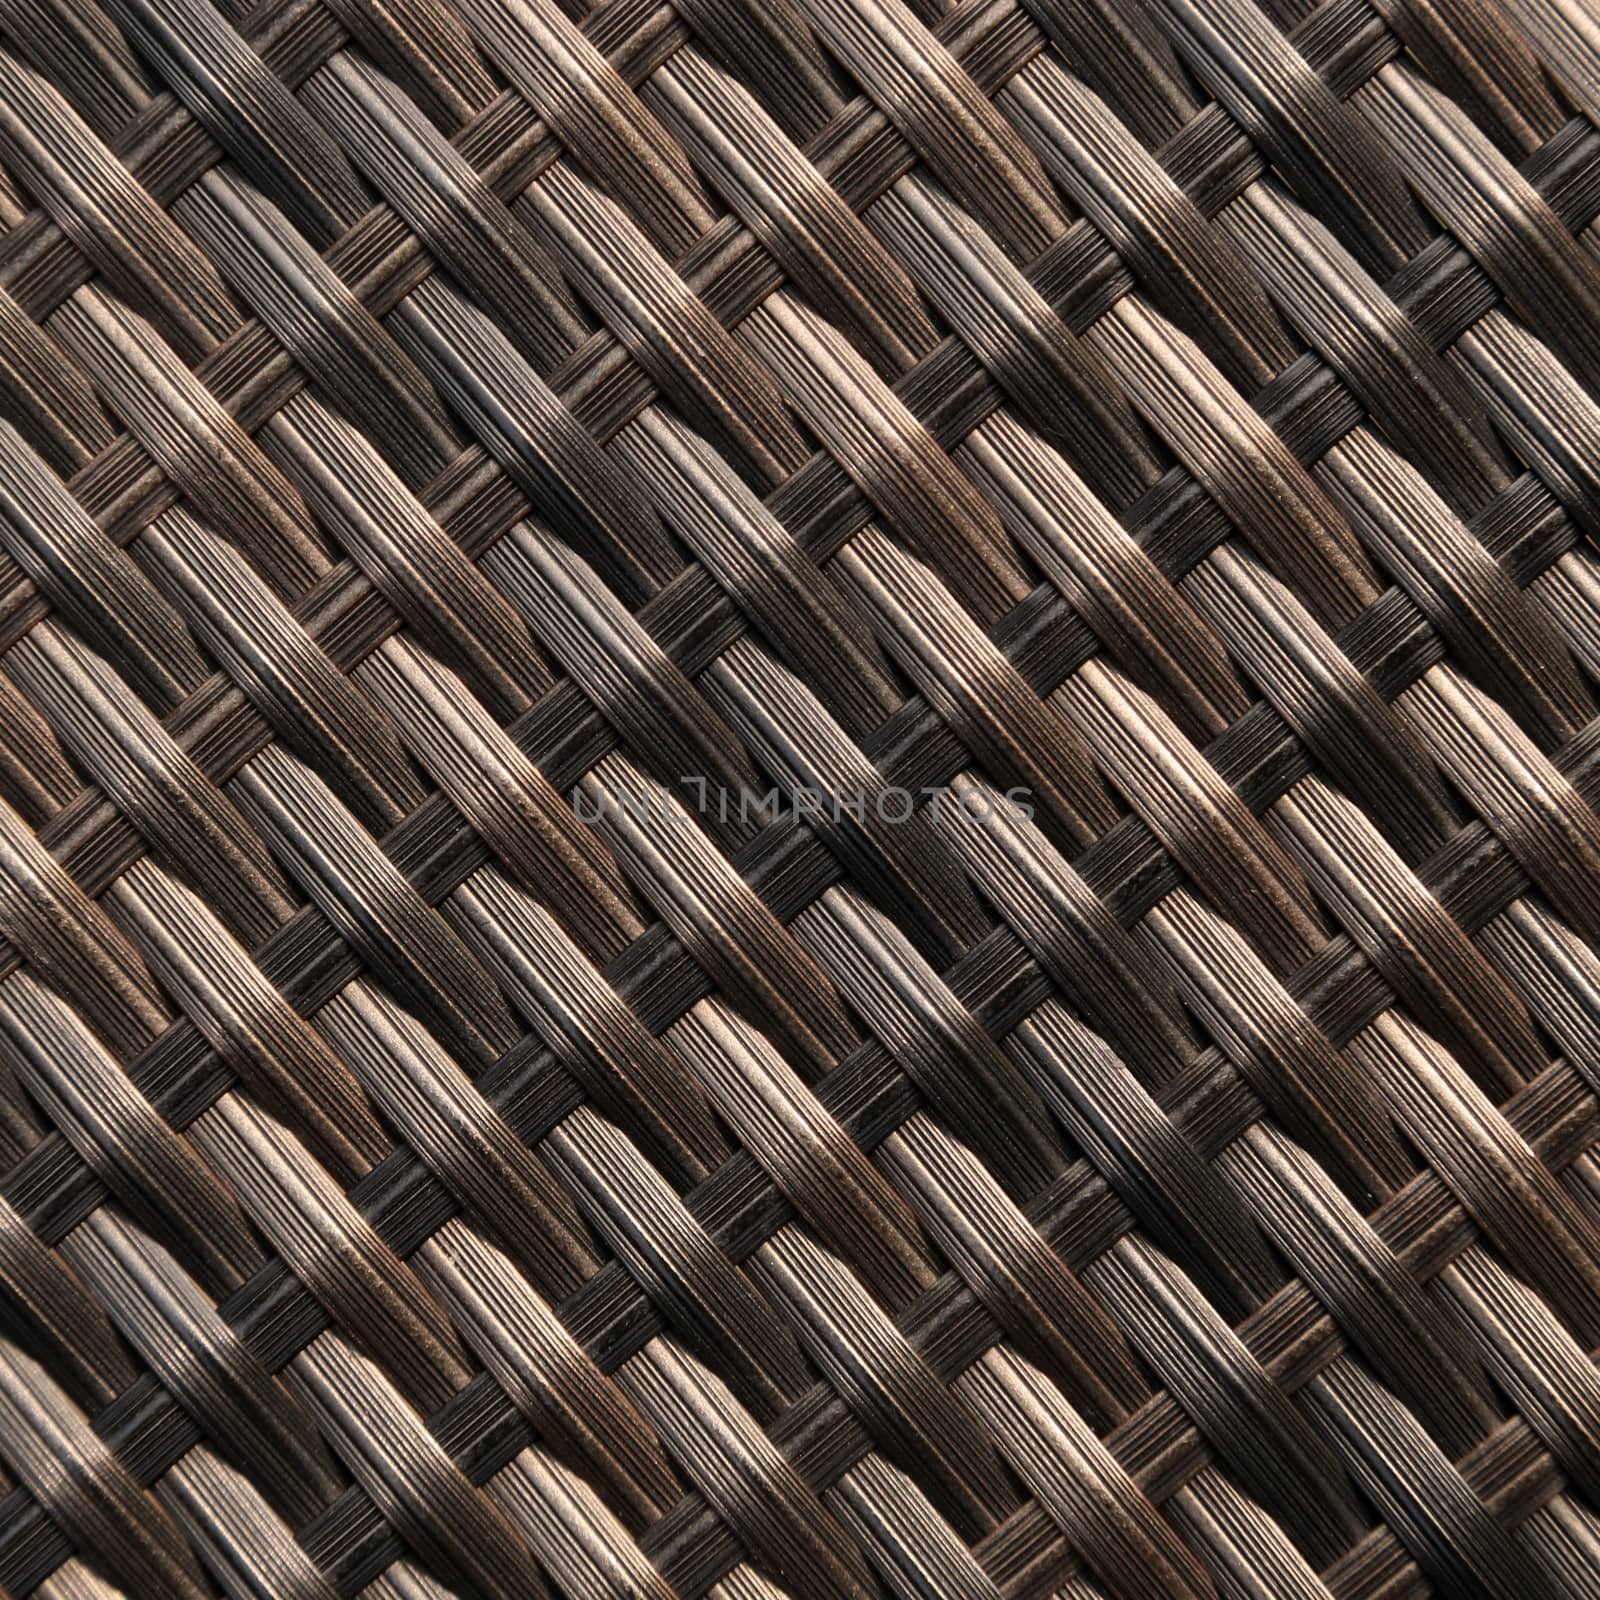 Craft wicker or rattan material by liewluck